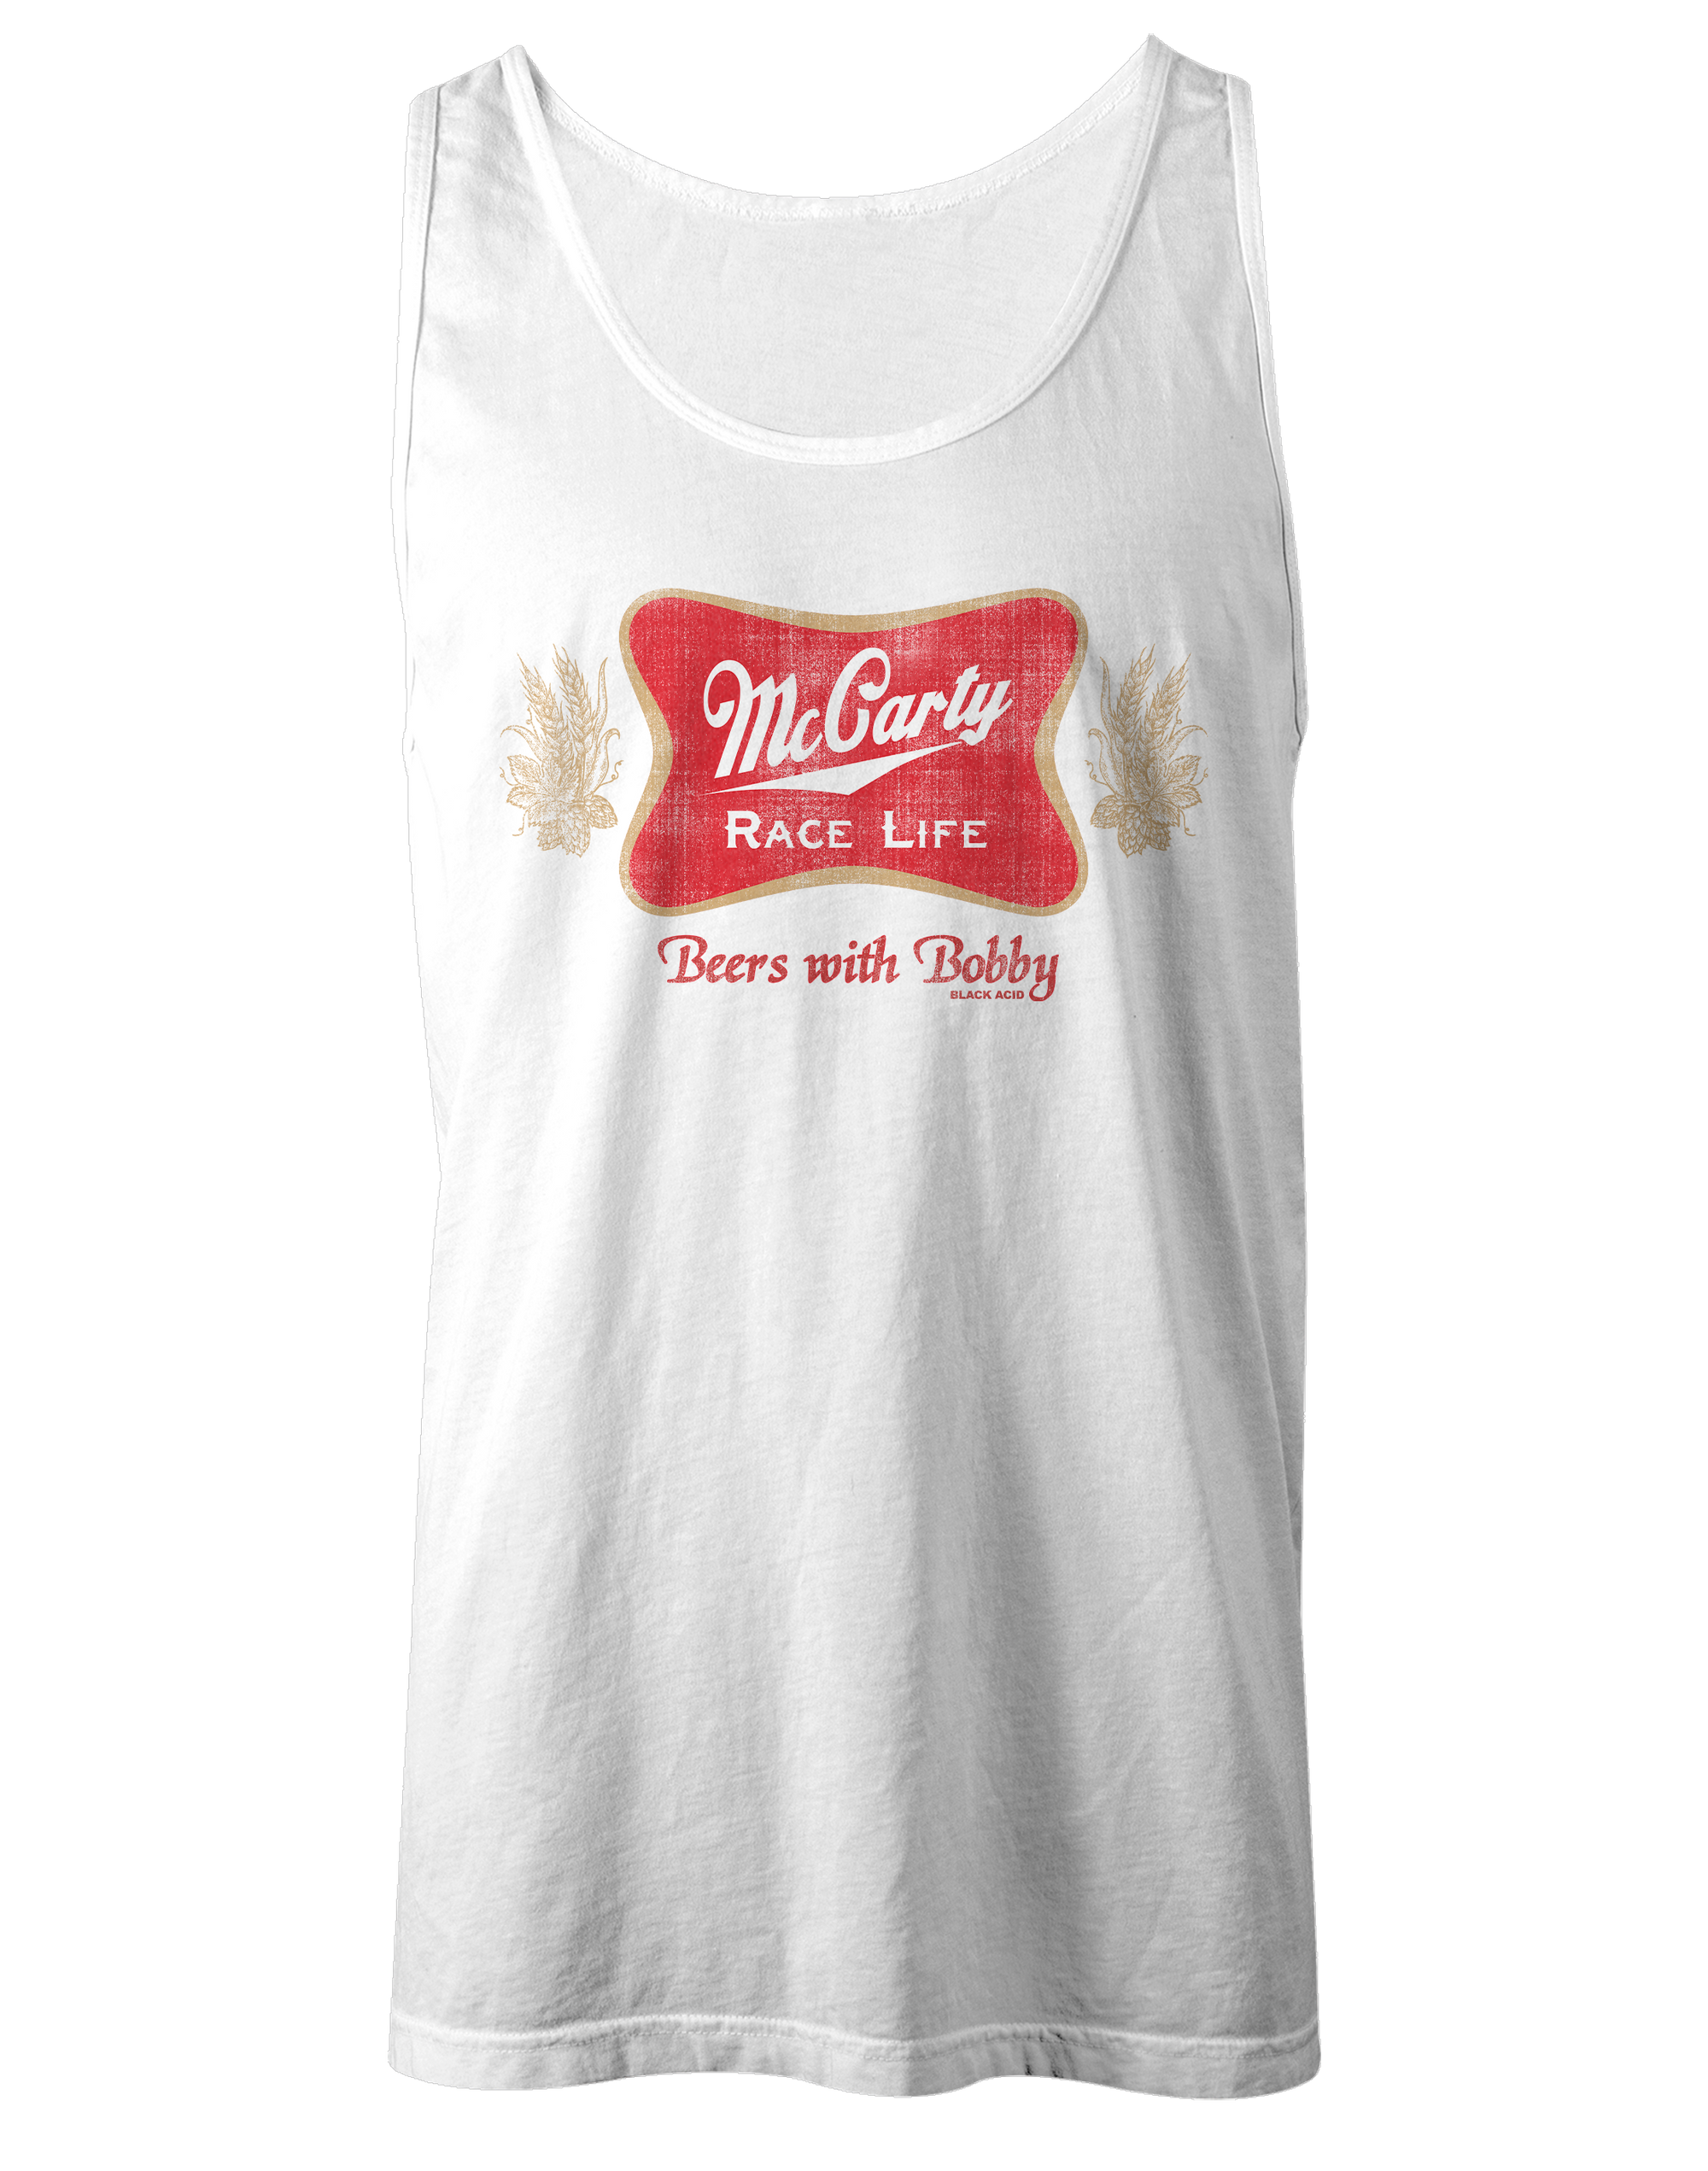 Beers with Bobby - Race Life Tank Tops